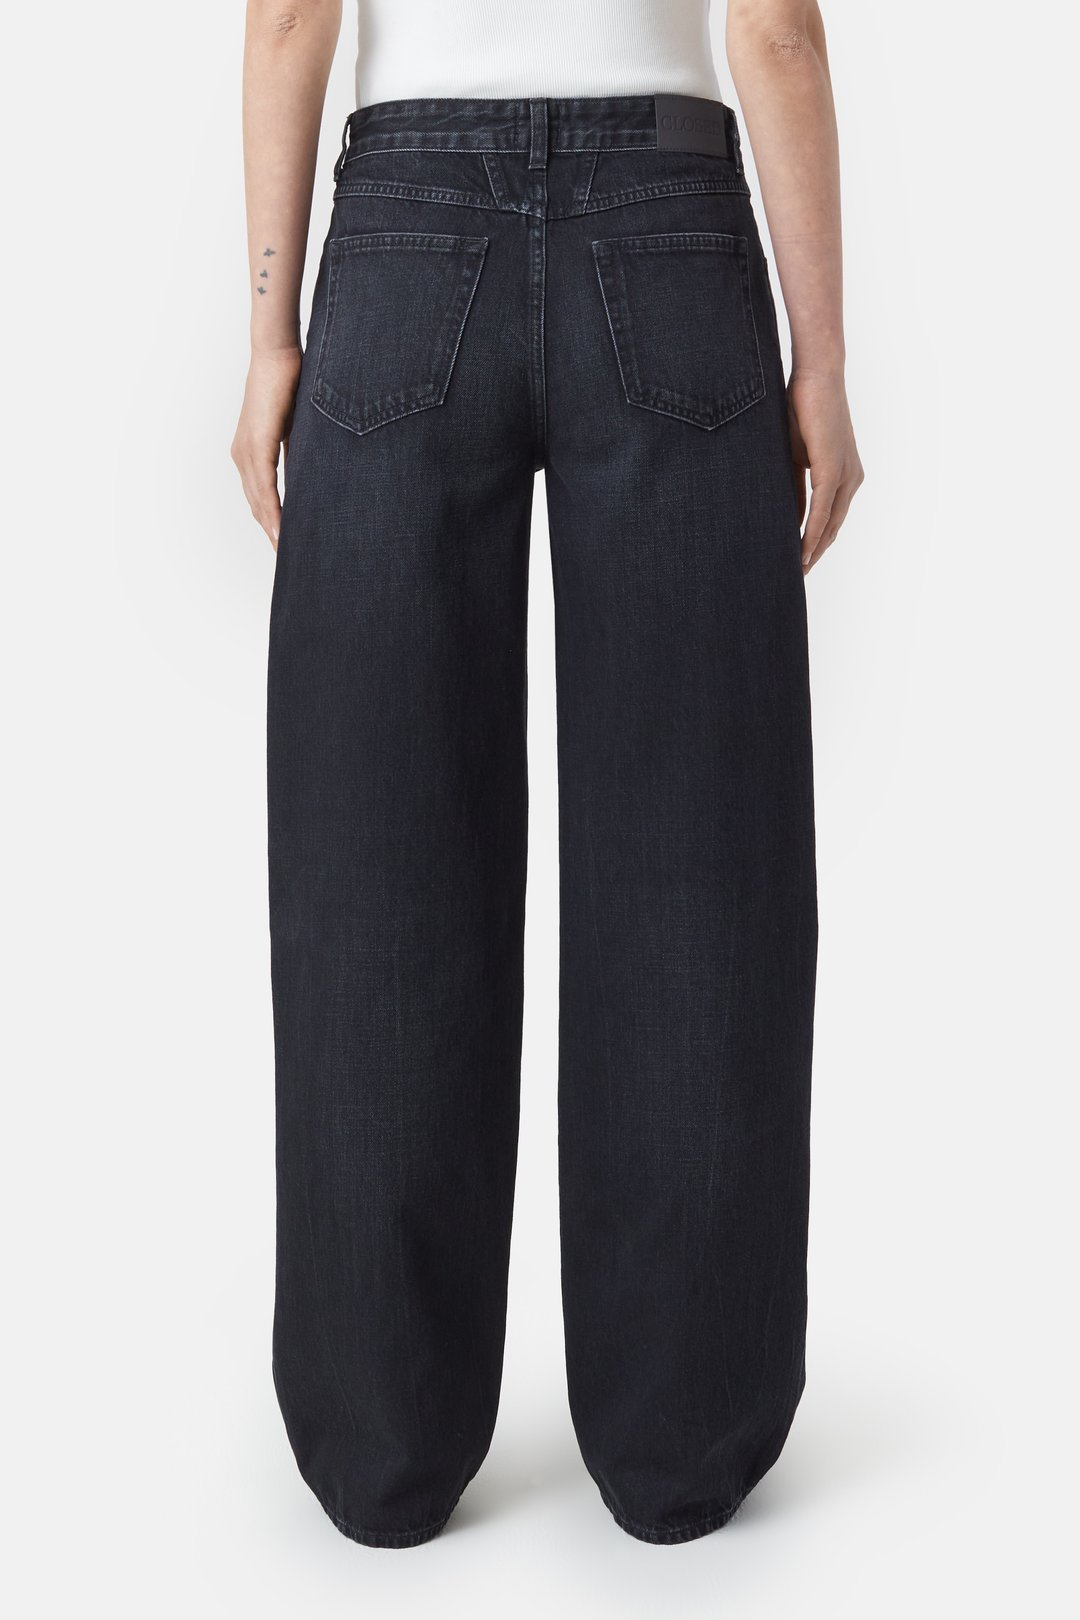 WIDE JEANS - STYLE NAME NIKKA | CLOSED